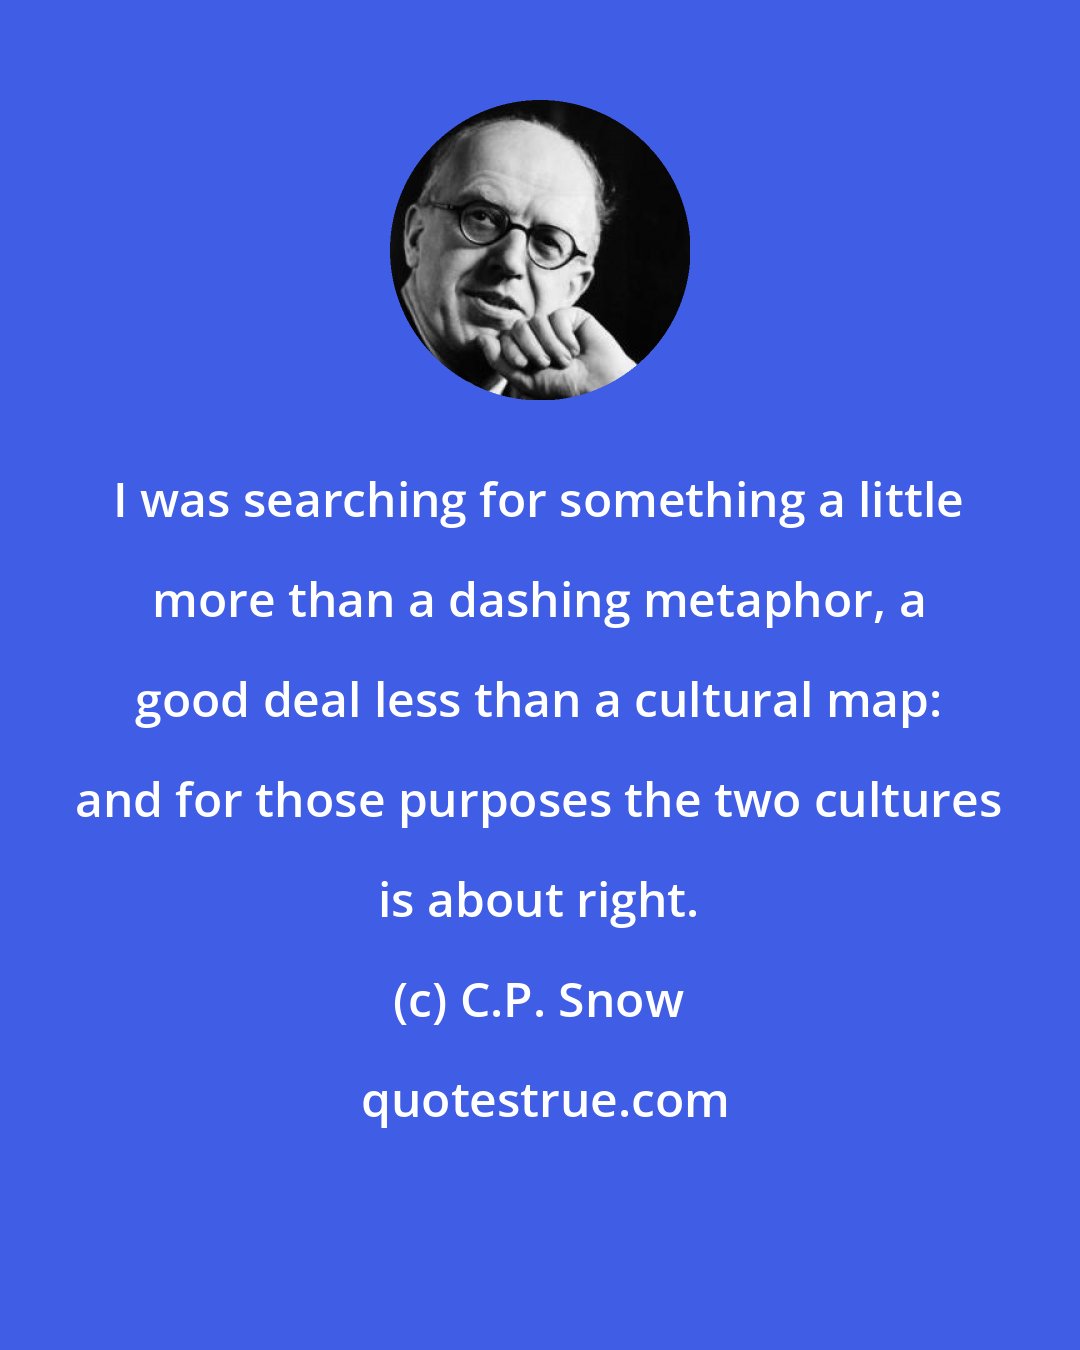 C.P. Snow: I was searching for something a little more than a dashing metaphor, a good deal less than a cultural map: and for those purposes the two cultures is about right.